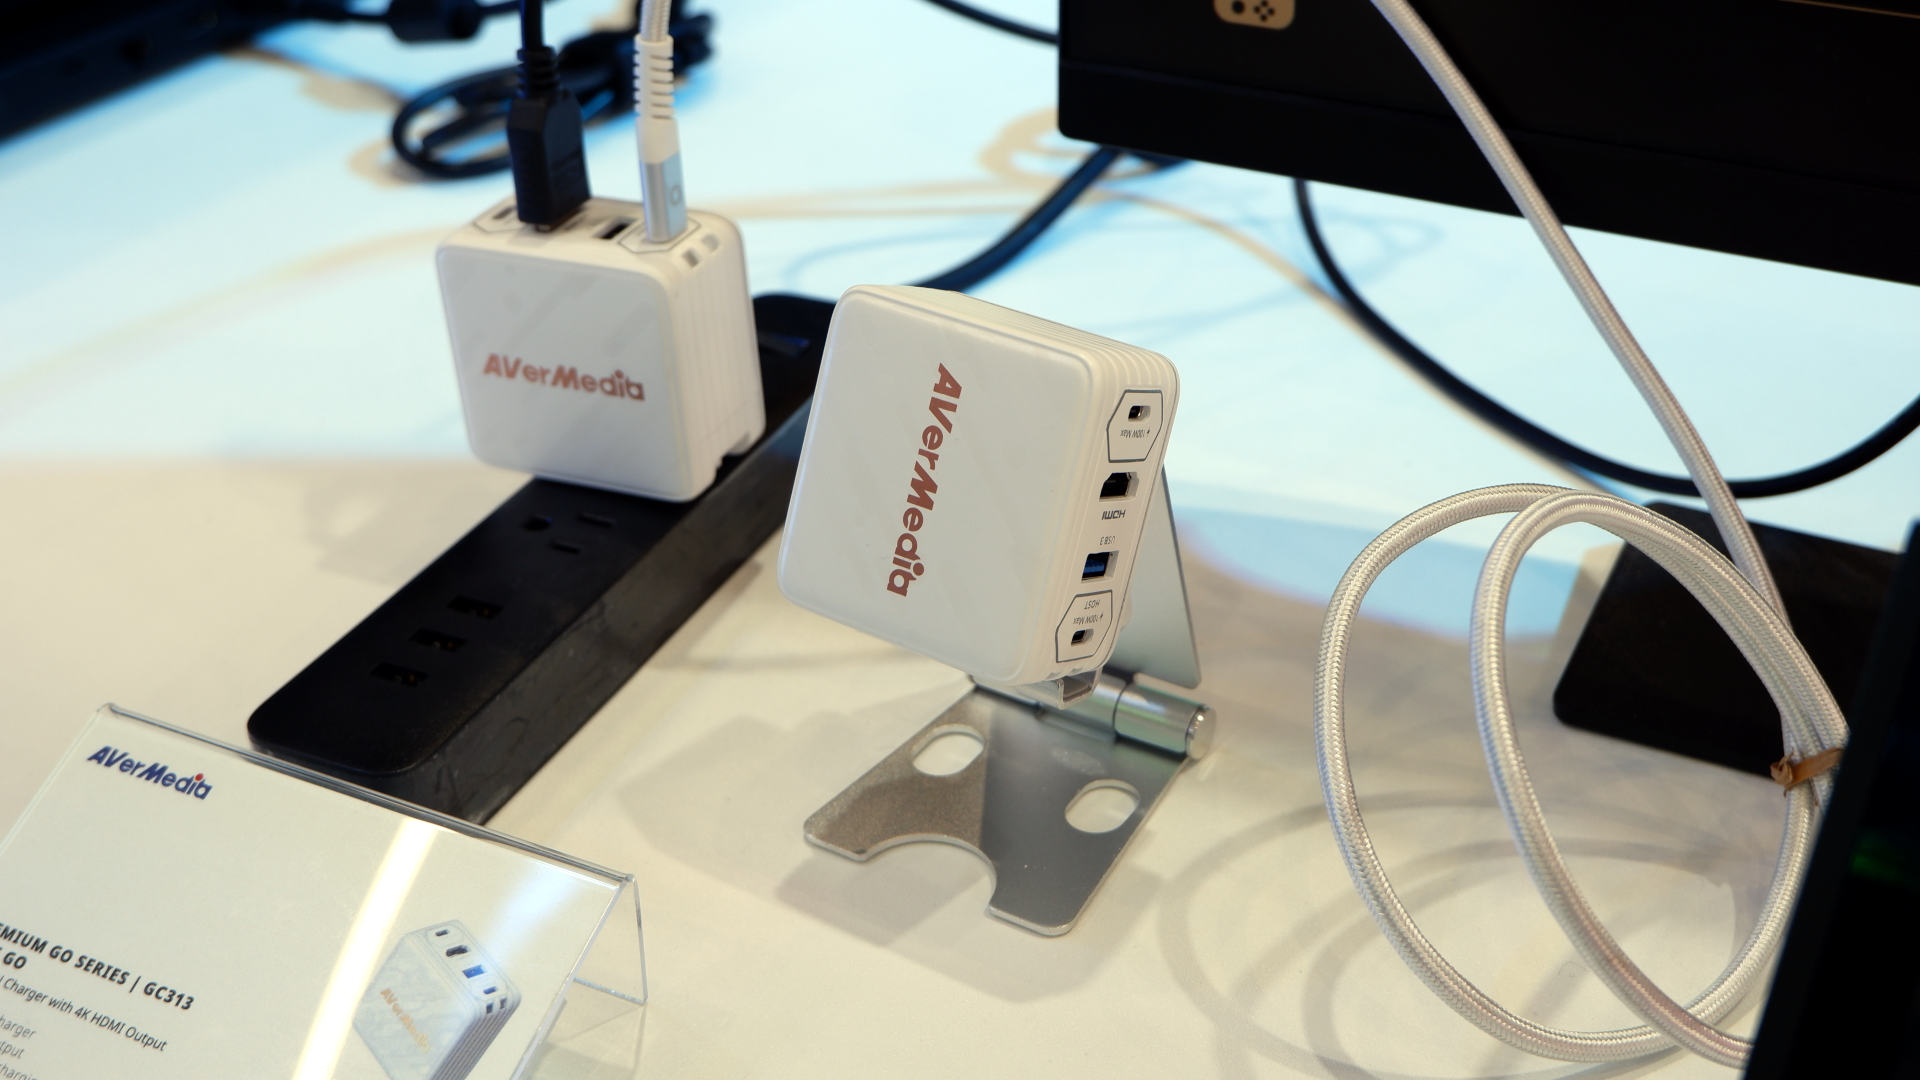 Photo of the Avermedia Premium Go series of GaN chargers, with HDMI 4K output, USB hub, and 1080p capture in the Elite Go